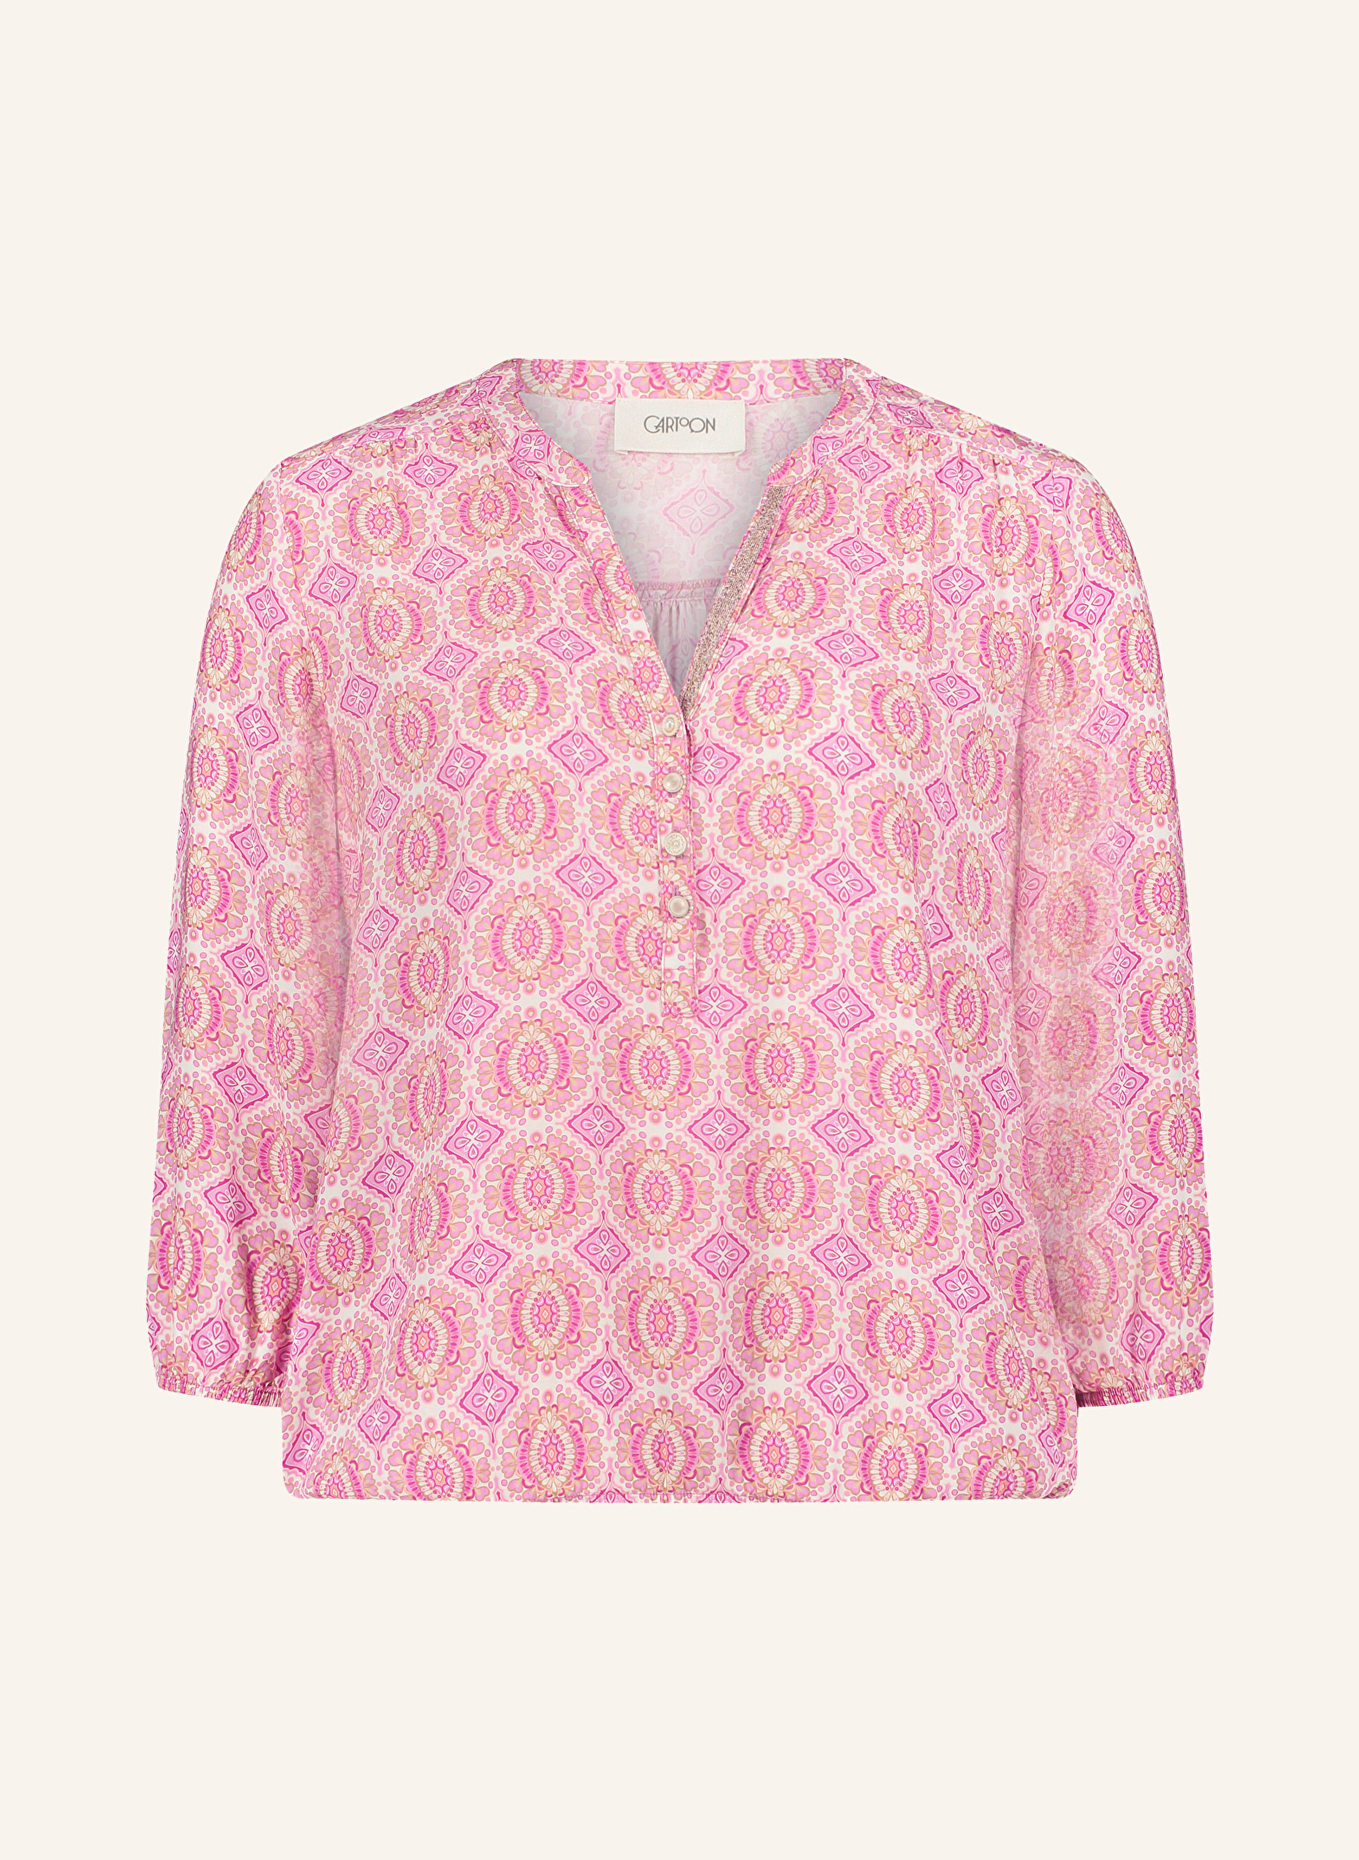 CARTOON Shirt blouse with 3/4 sleeves, Color: PINK/ PINK (Image 1)